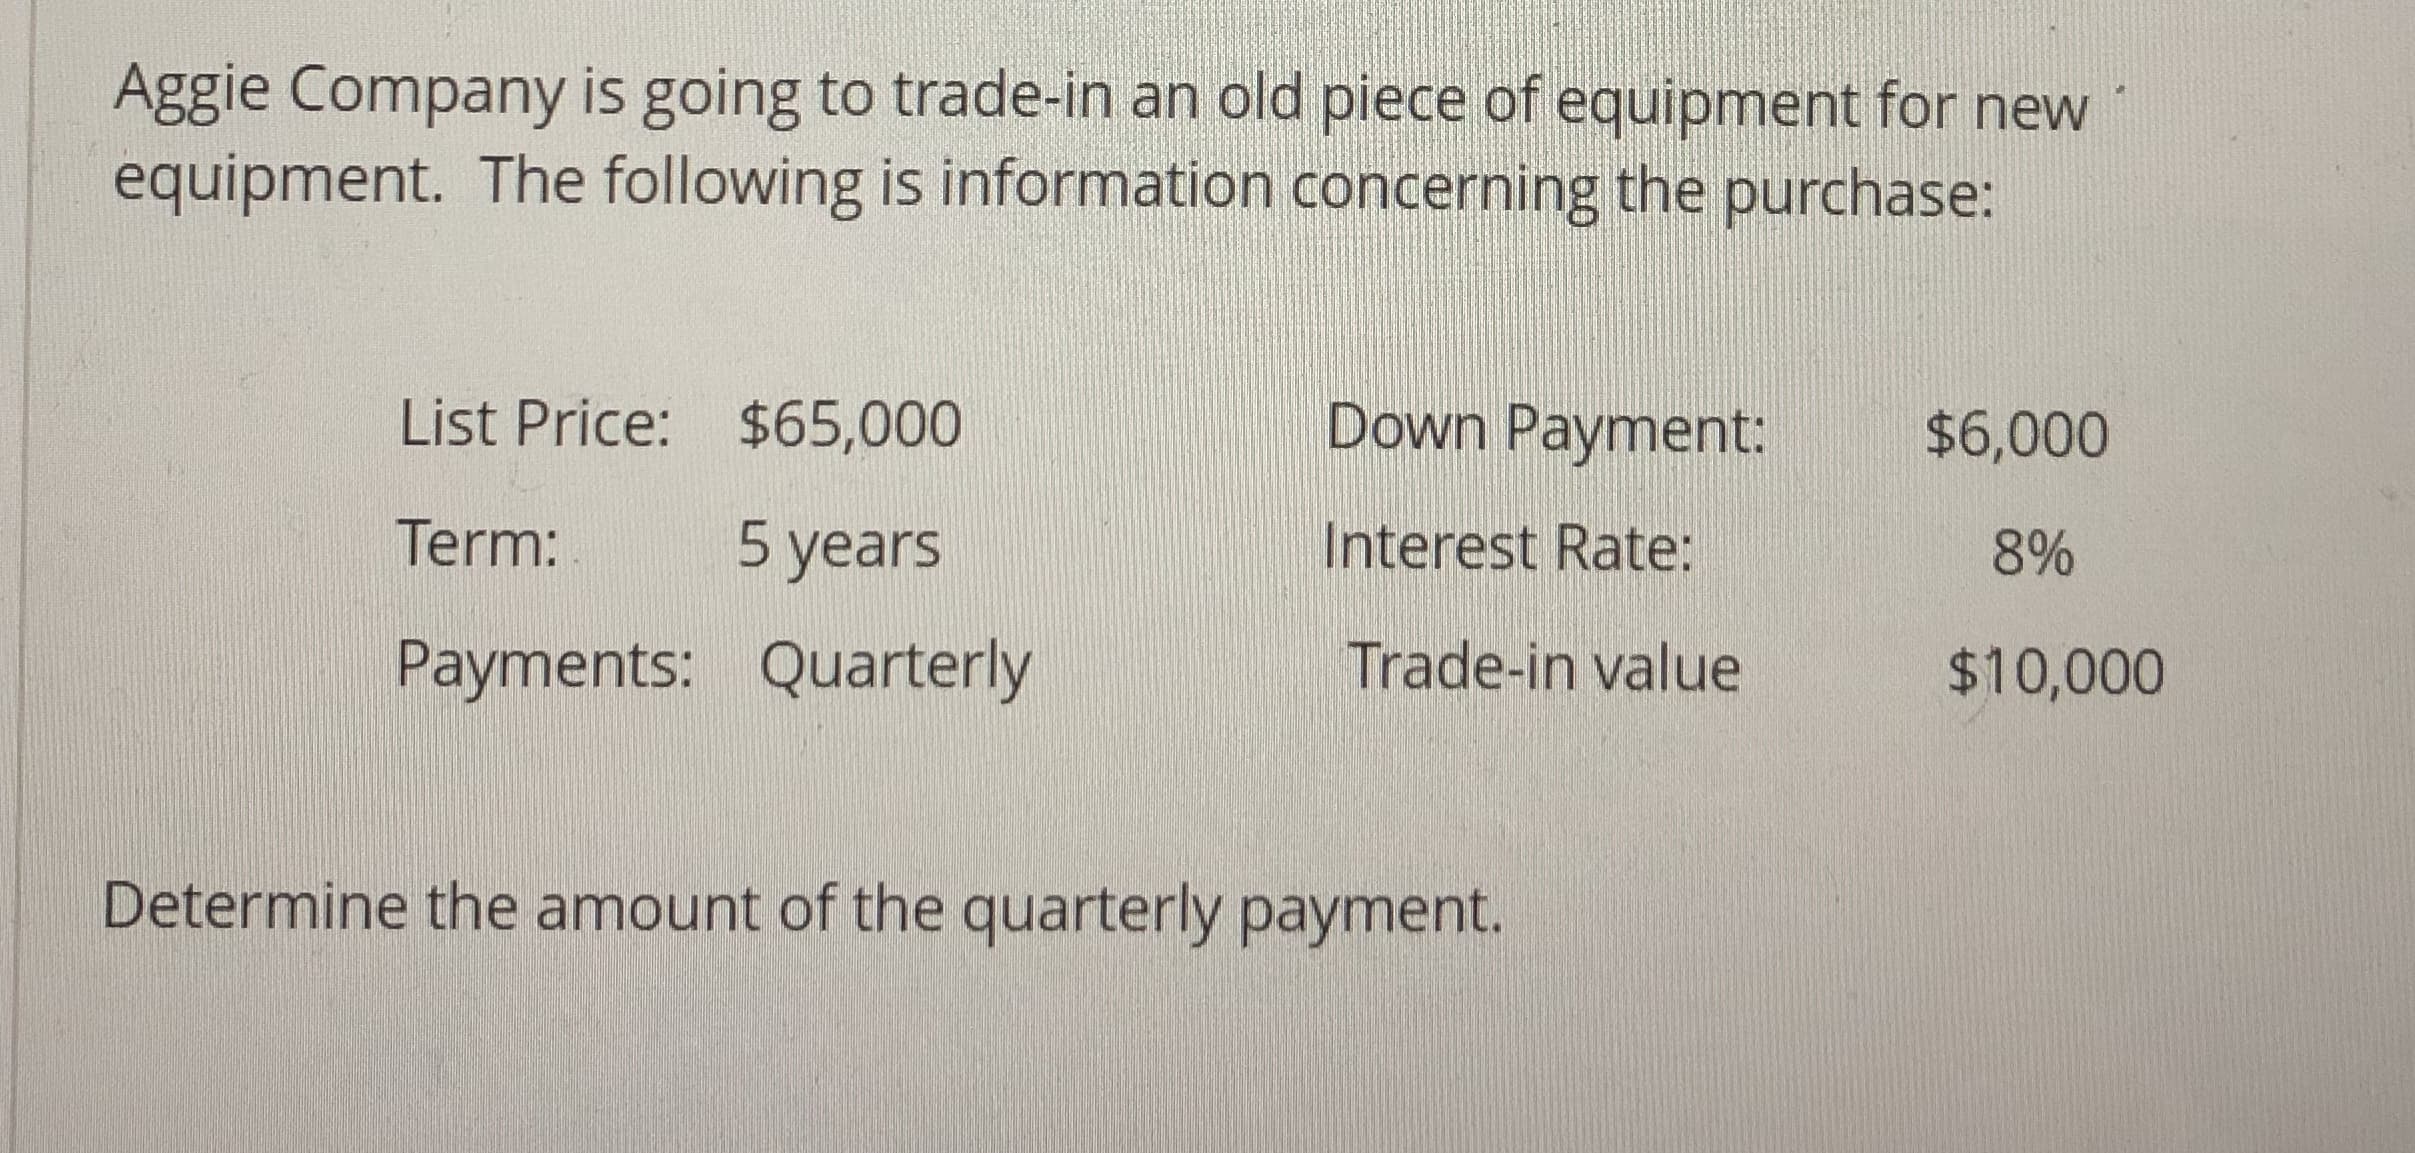 Aggie Company is going to trade-in an old piece of equipment for new
equipment. The following is information concerning the purchase:
List Price: $65,000
Term: 5 years
Payments: Quarterly
Down Payment: $6,000
Interest Rate:
Trade-in value 10,000
8%
Determine the amount of the quarterly payment.
